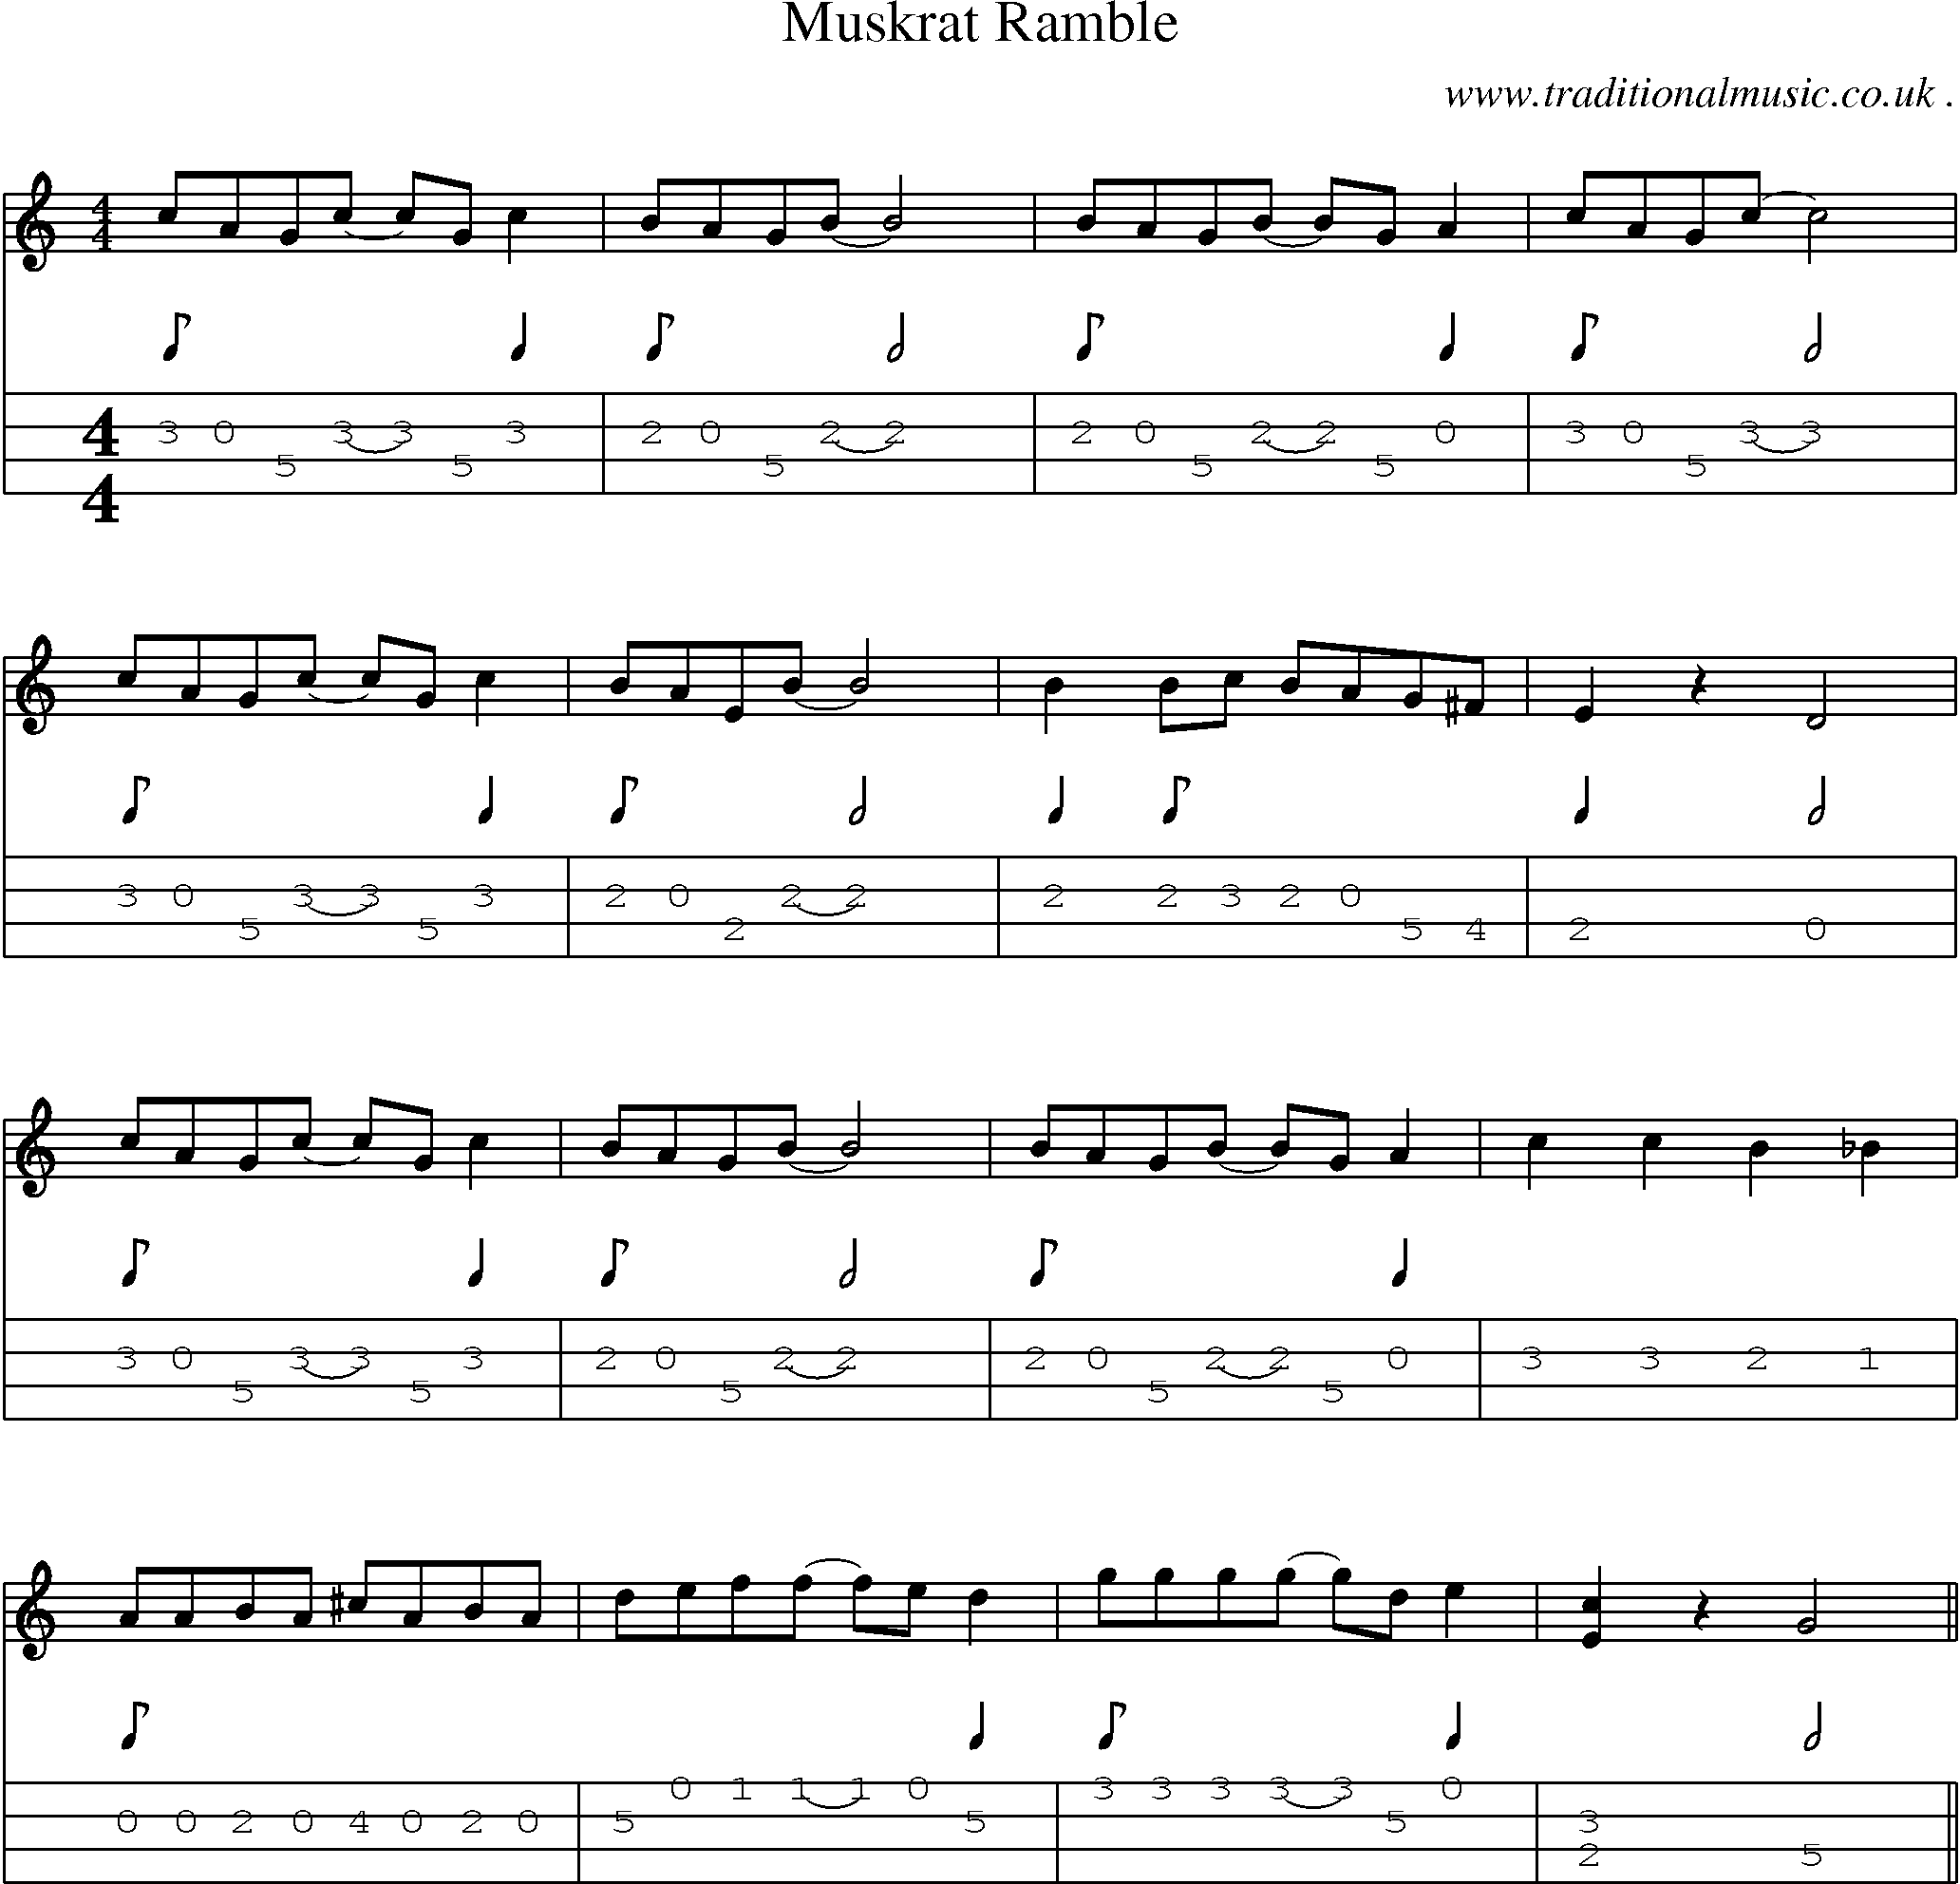 Music Score and Mandolin Tabs for Muskrat Ramble